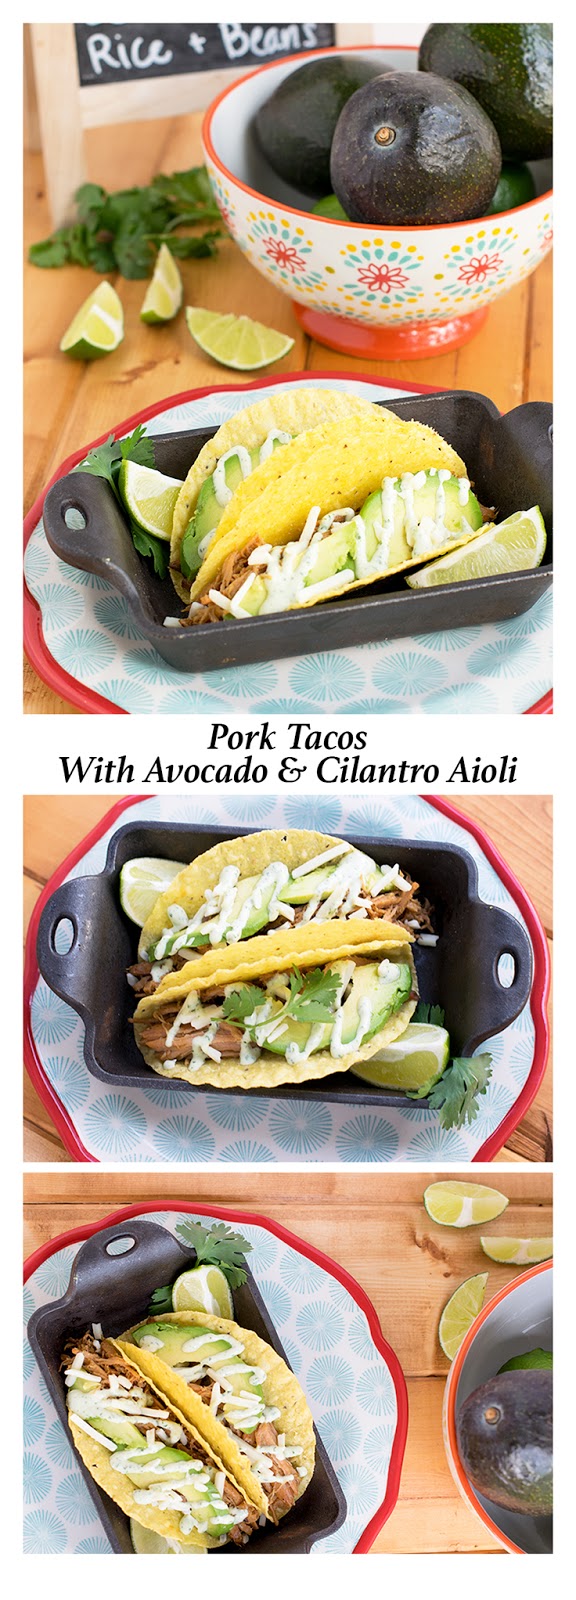 These easy pork tacos will knock your socks off! Make those hectic back to school dinners even easier by utilizing your slow cooker for this recipe. Features an additional recipe for Cilantro Aioli that makes the tacos taste like you just ordered them from a taco truck! #pork #GetBackToPork #recipe #dinner #taco #WeaveMadeMedia